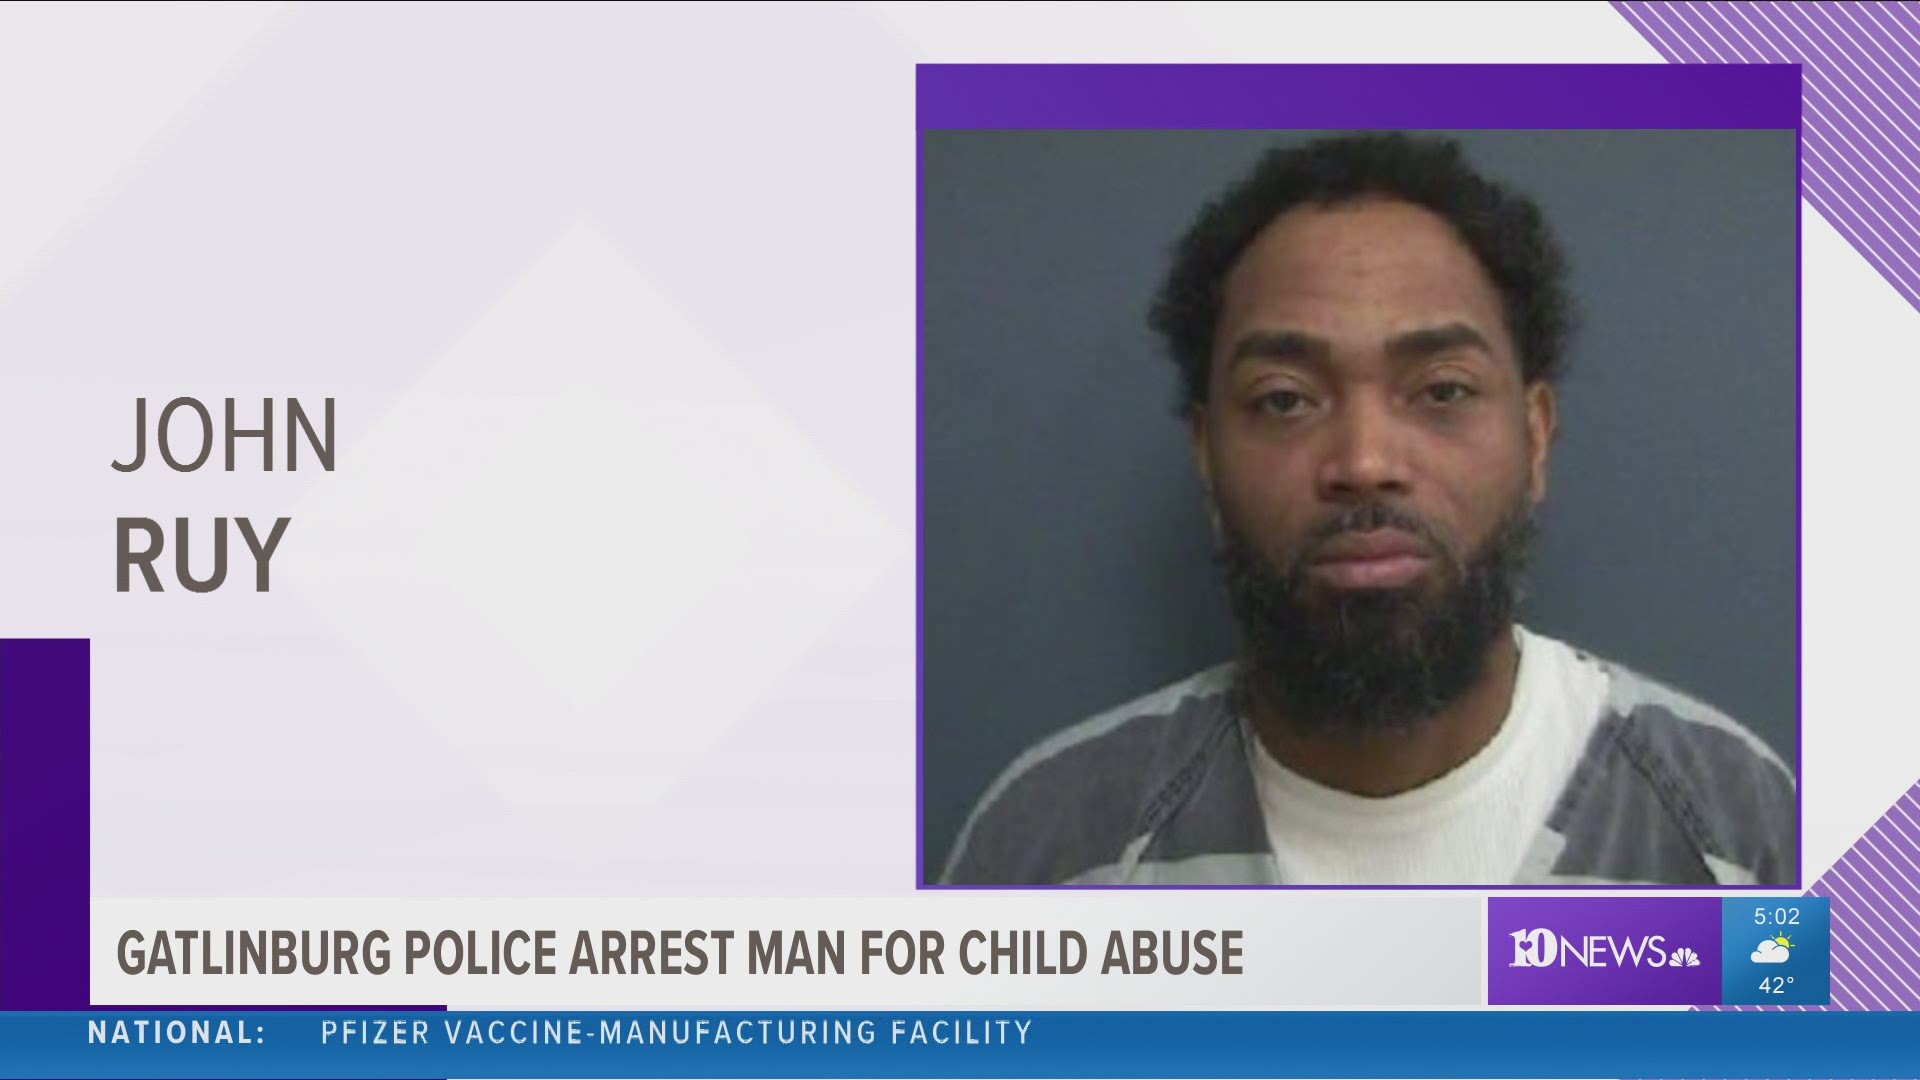 A Georgia man is facing child abuse and assault charges after Gatlinburg police said he attacked a 9-year-old boy with a pool stick and attacked the boy's mother.